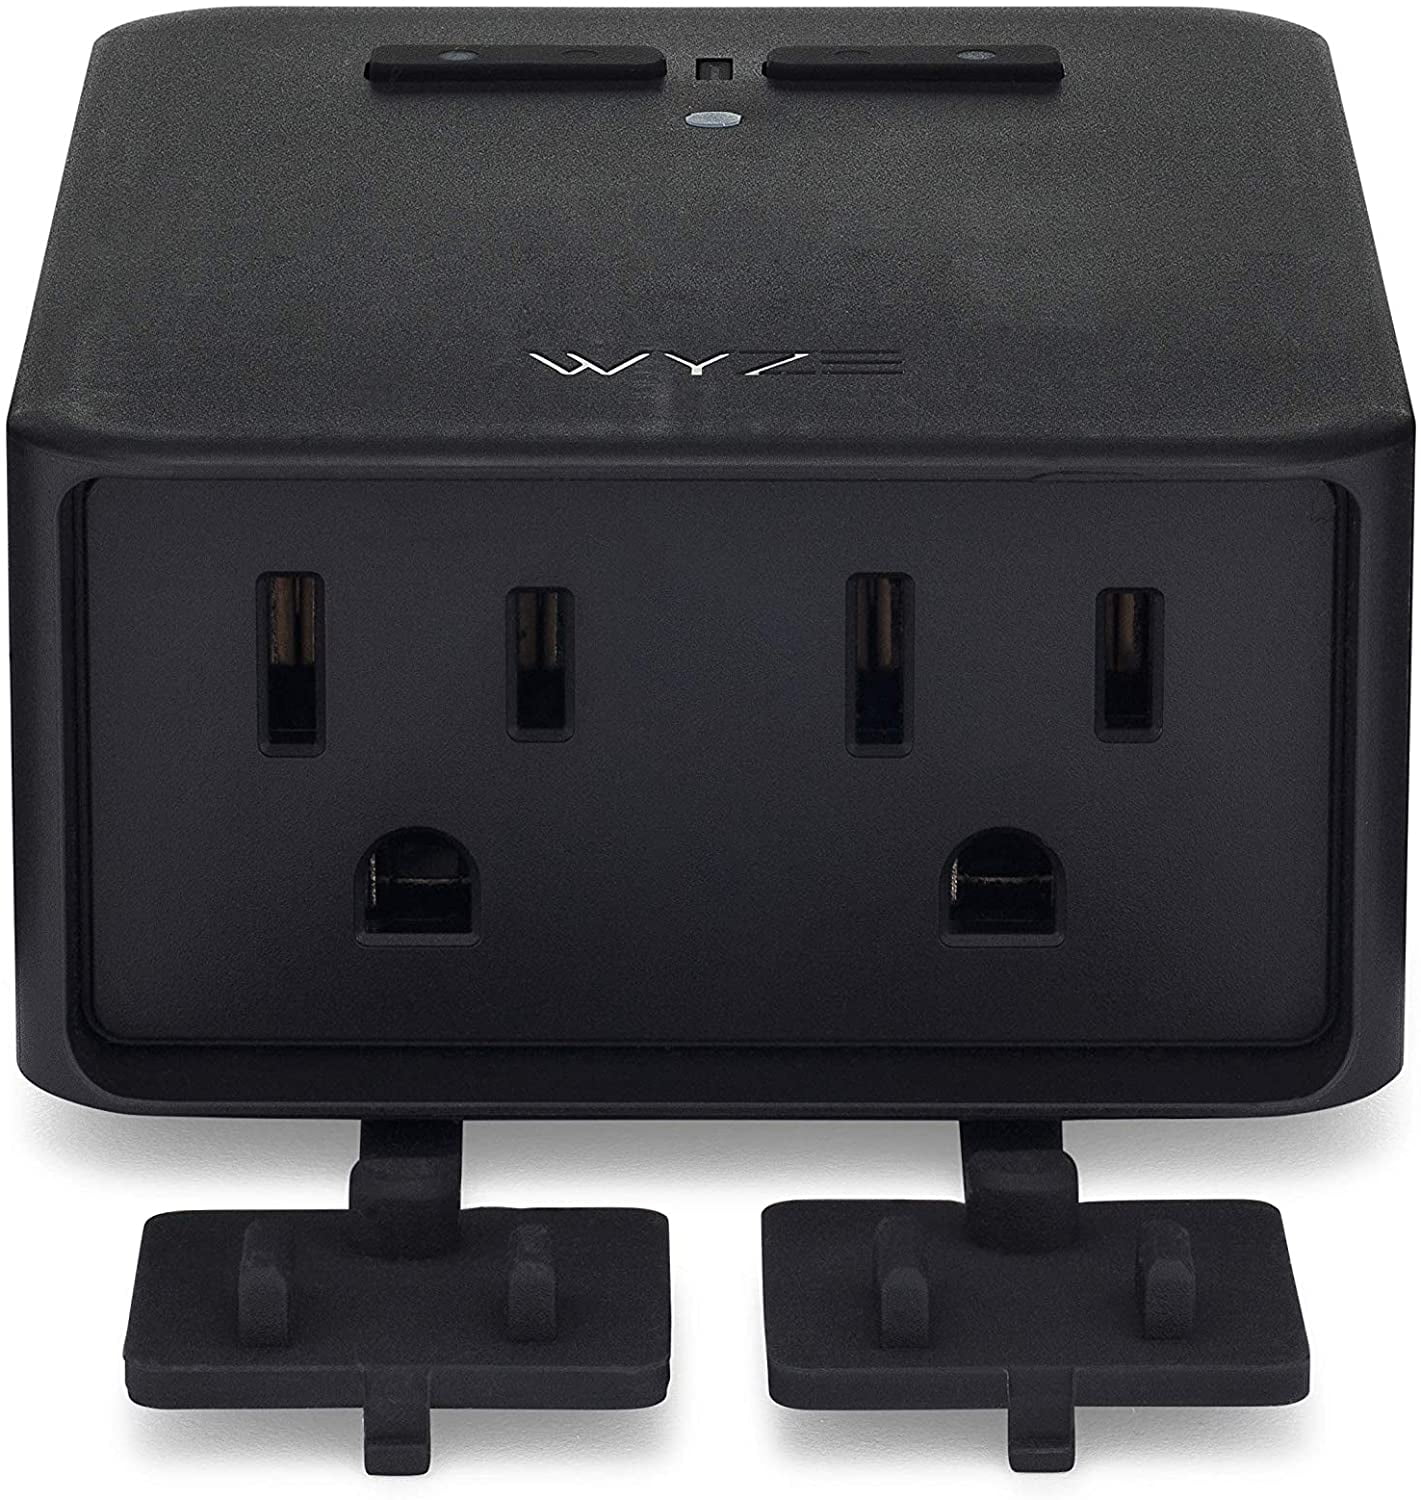 Wyze Plug Outdoor, Smart Plug with Dual Outlets, Energy Monitoring